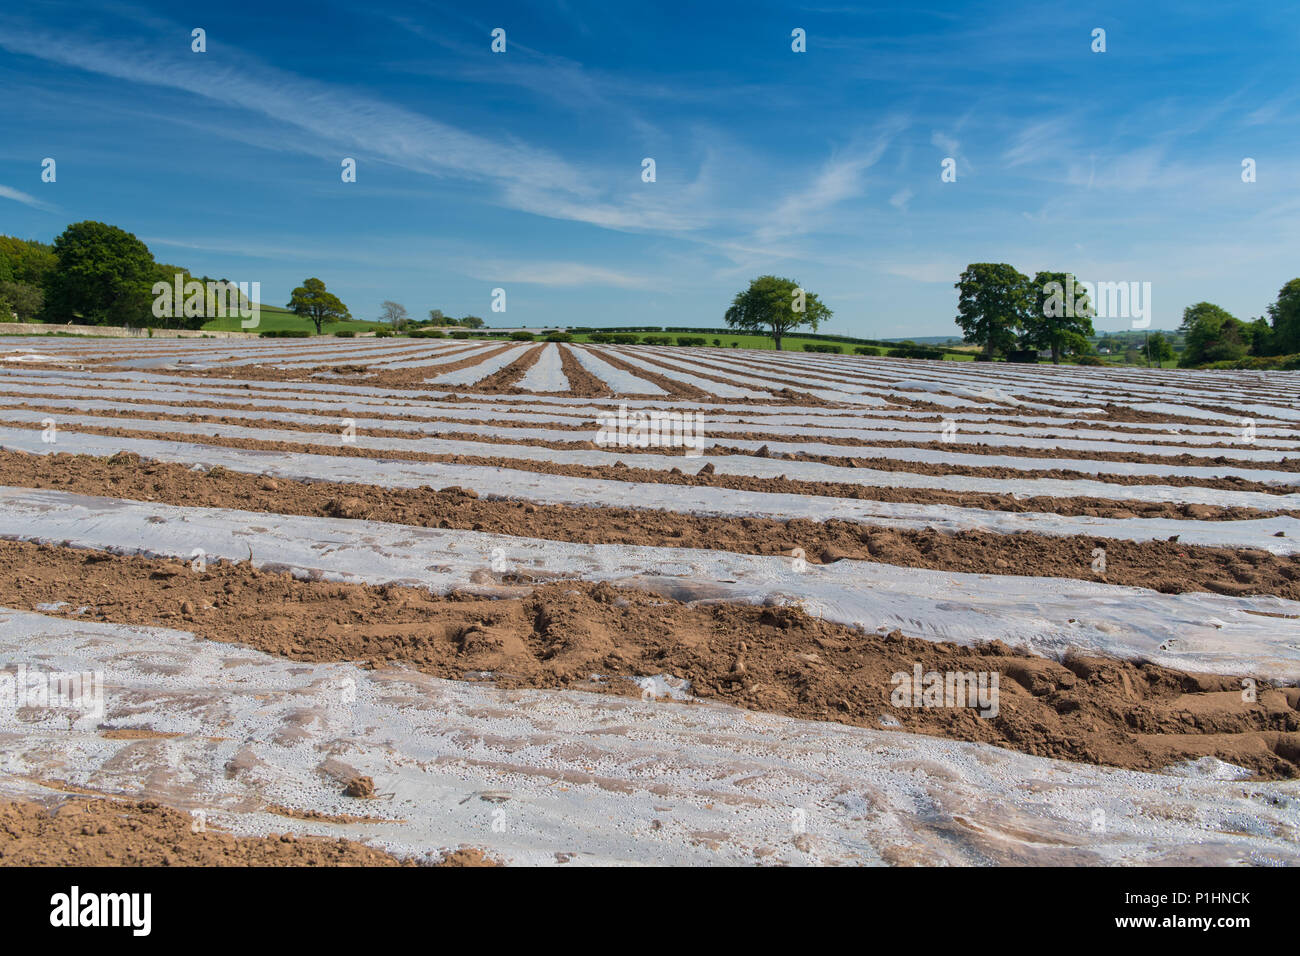 Newly planted field of Maize under bio-degradeable plastic sheeting to help aid early ggrowth. Cumbria, UK. Stock Photo